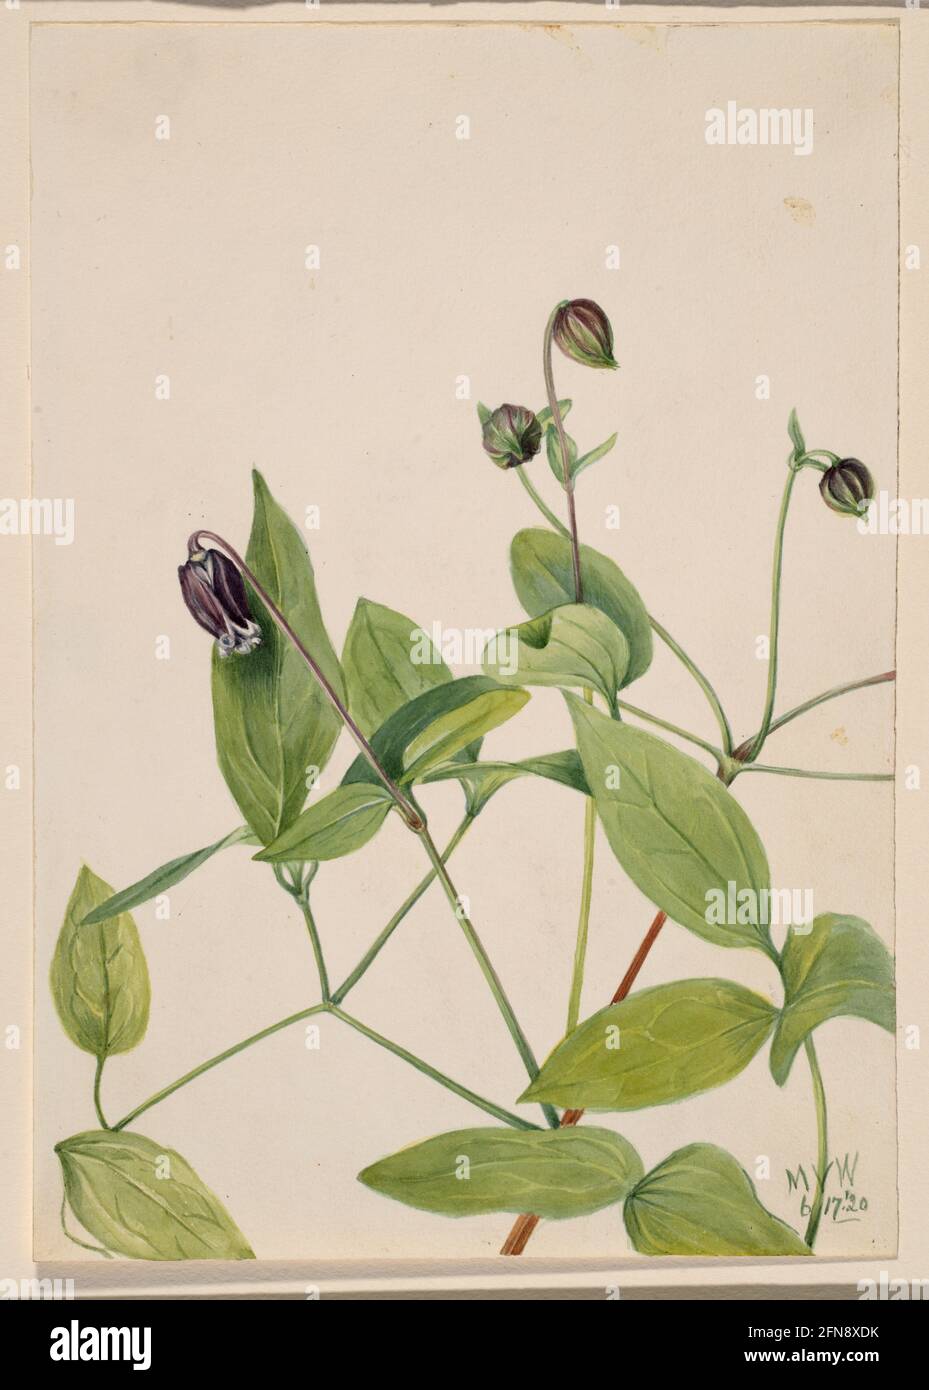 Leather Flower (Clematis viorna), 1920. Stock Photo